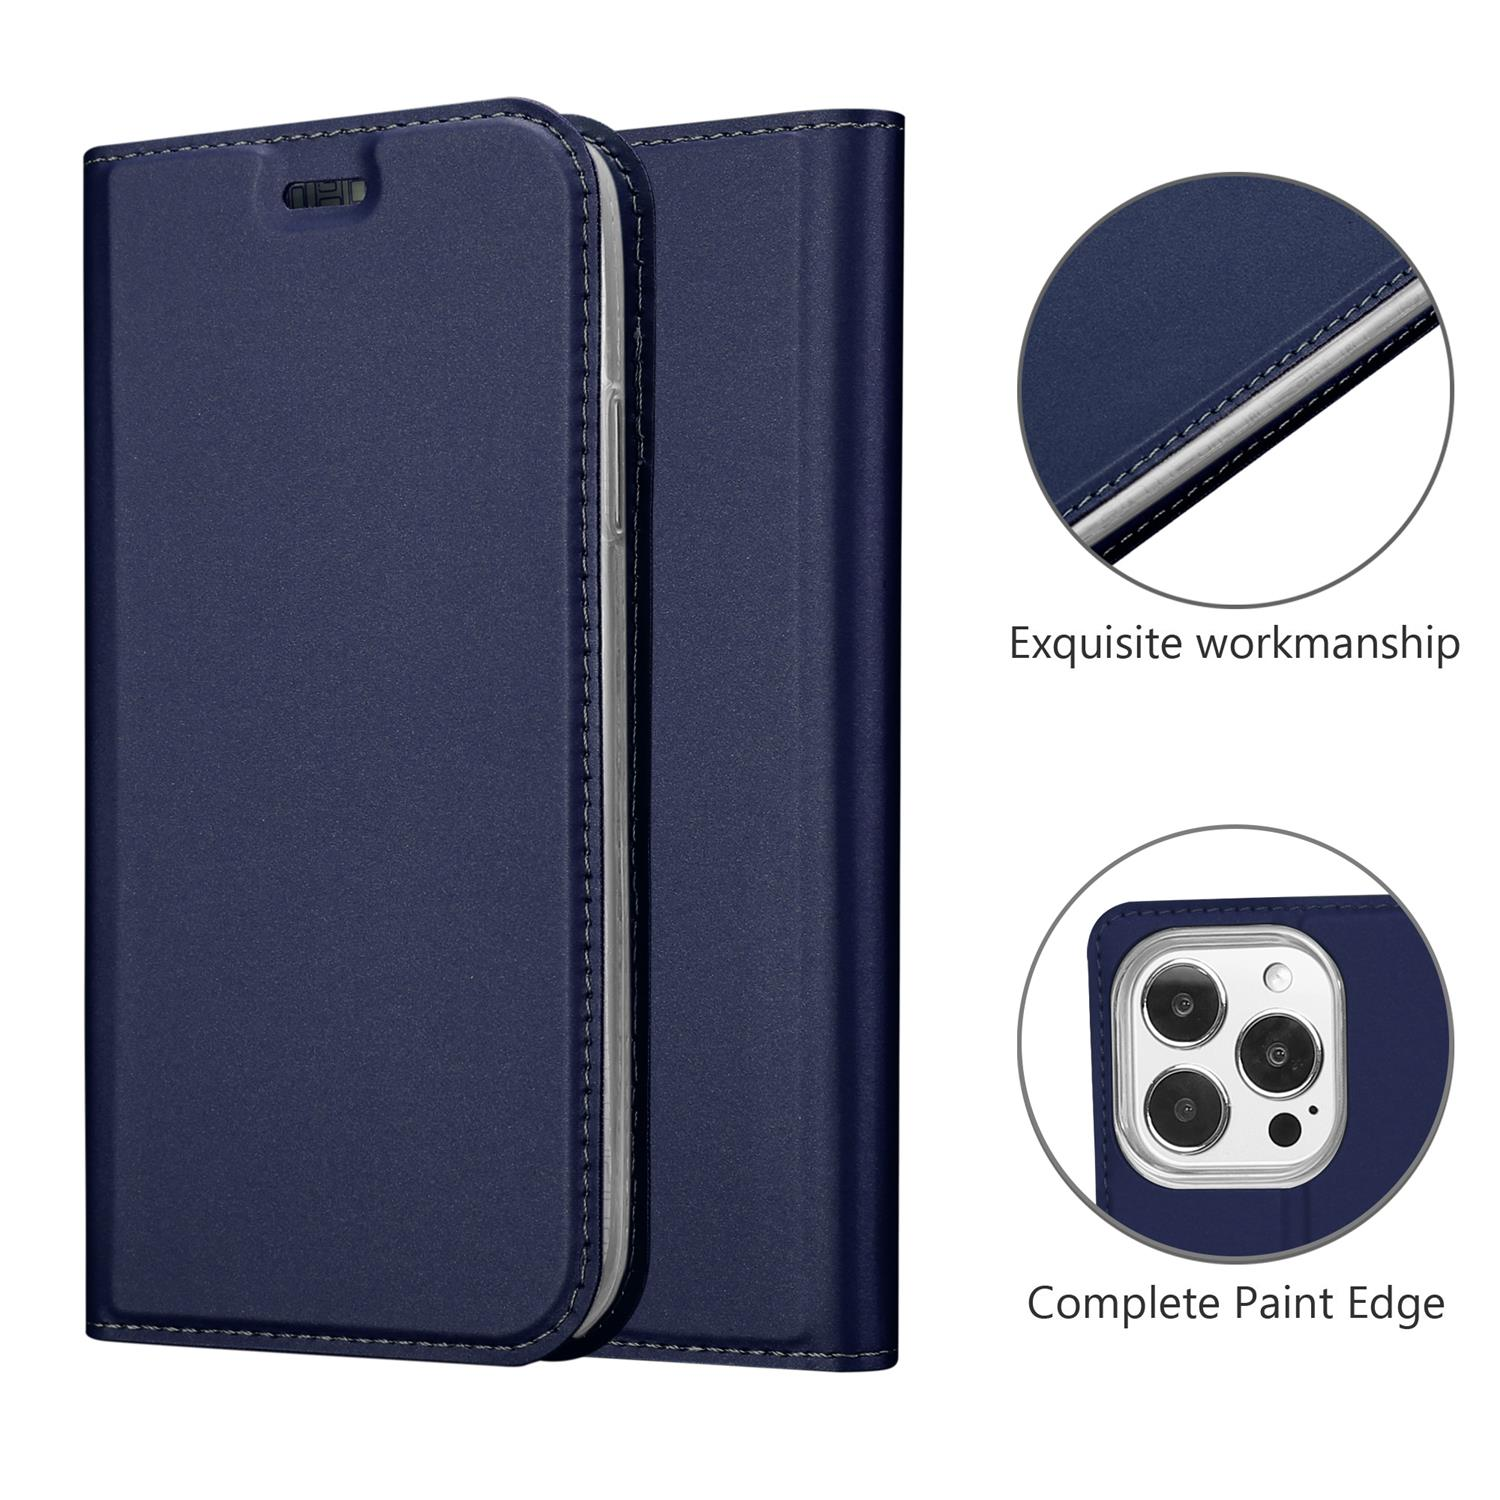 PRO Book Classy BLAU Handyhülle Apple, Bookcover, Style, DUNKEL iPhone MAX, CLASSY CADORABO 13